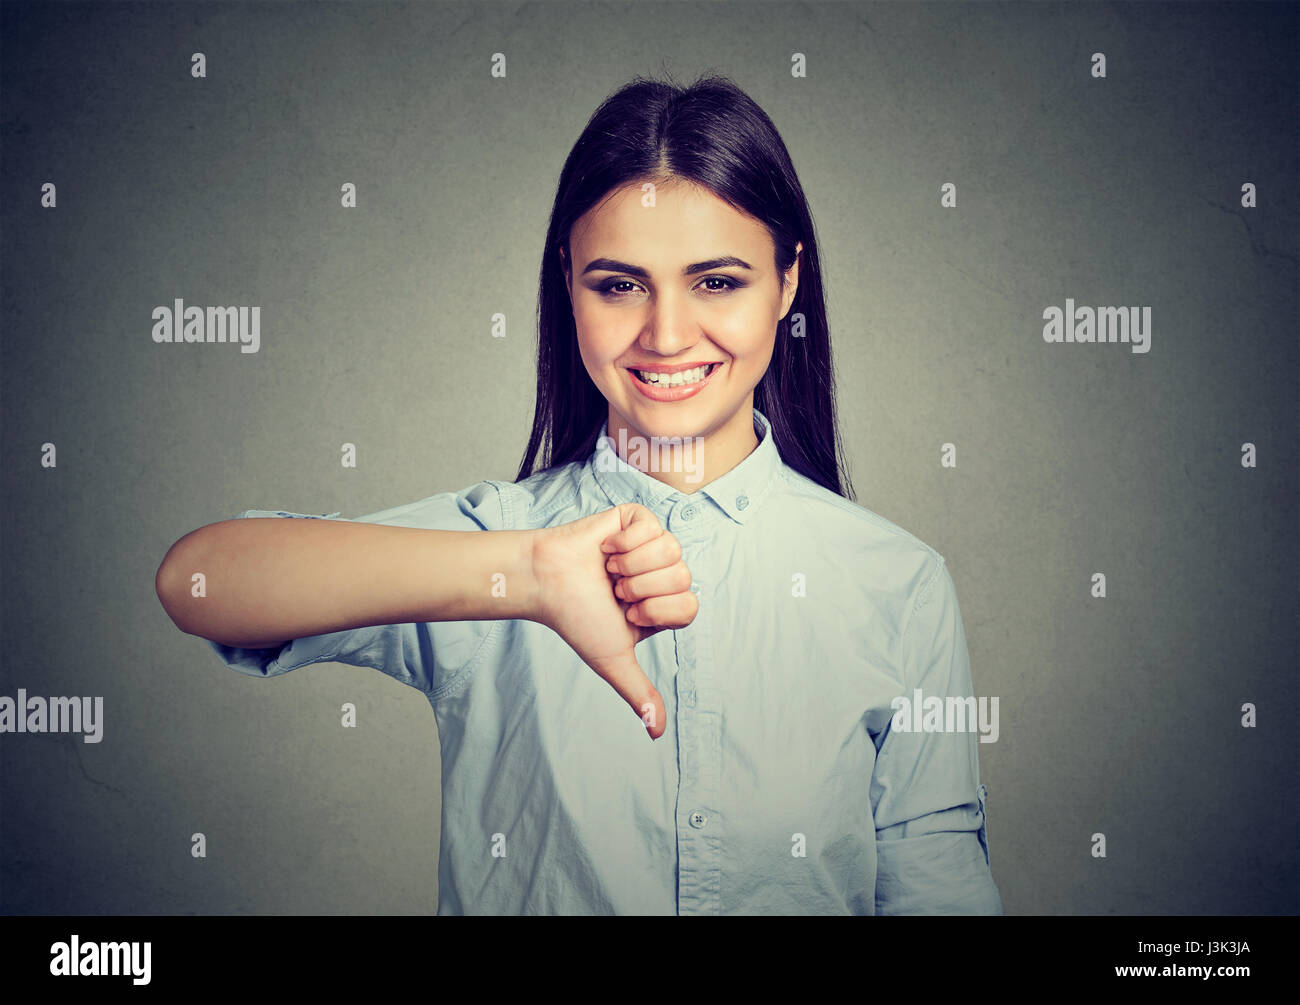 Smiling woman showing thumbs down Stock Photo